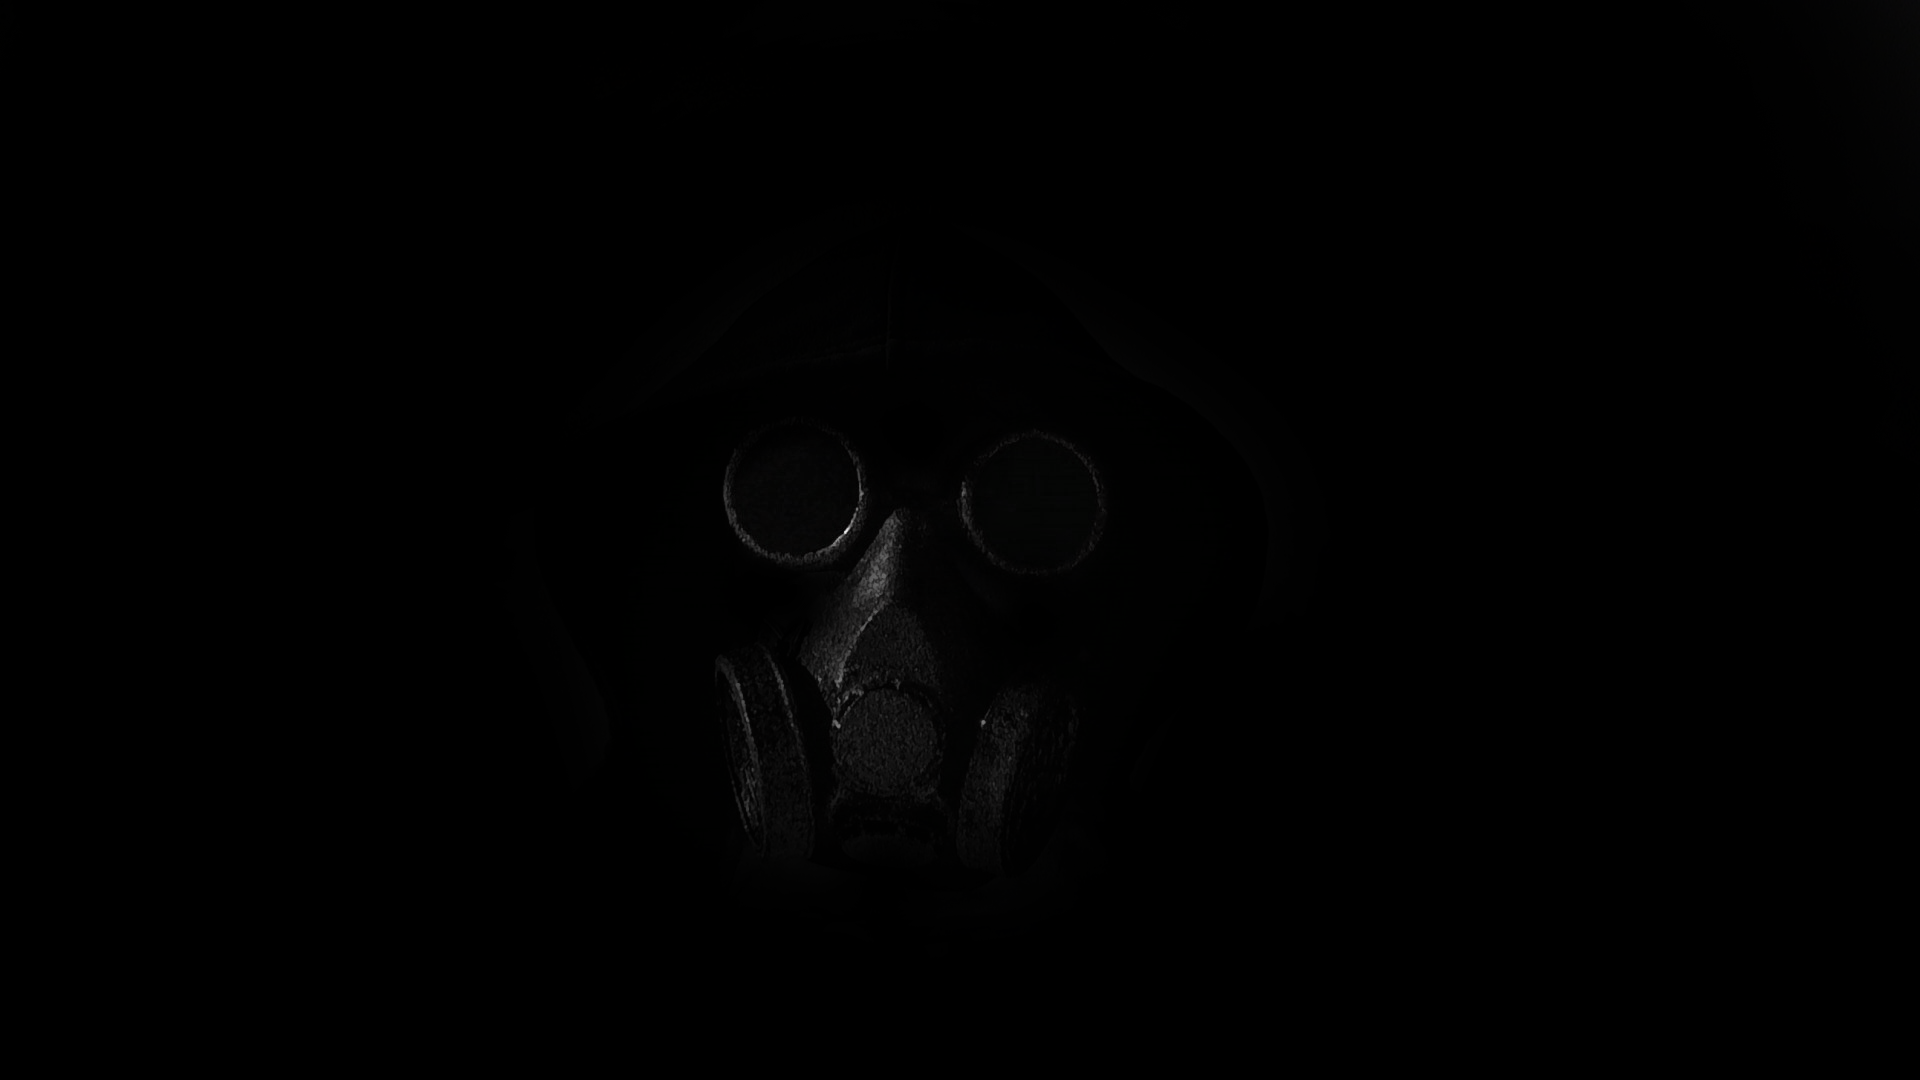 Cool Skull With Gas Mask Wallpaper Masks